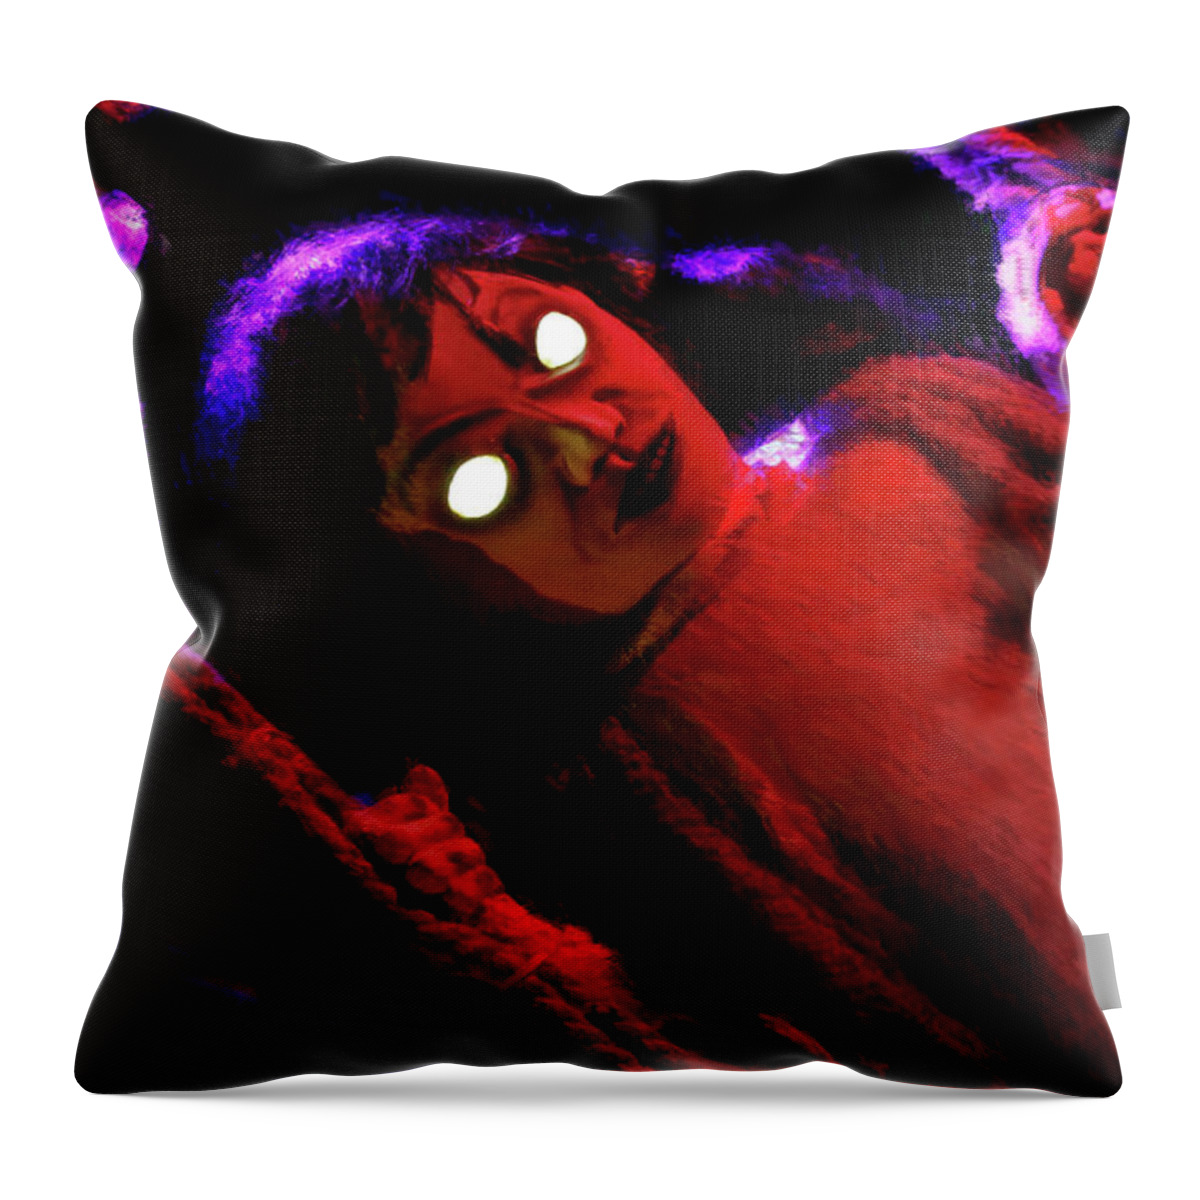  Throw Pillow featuring the photograph Eval On A Swing by Blake Richards